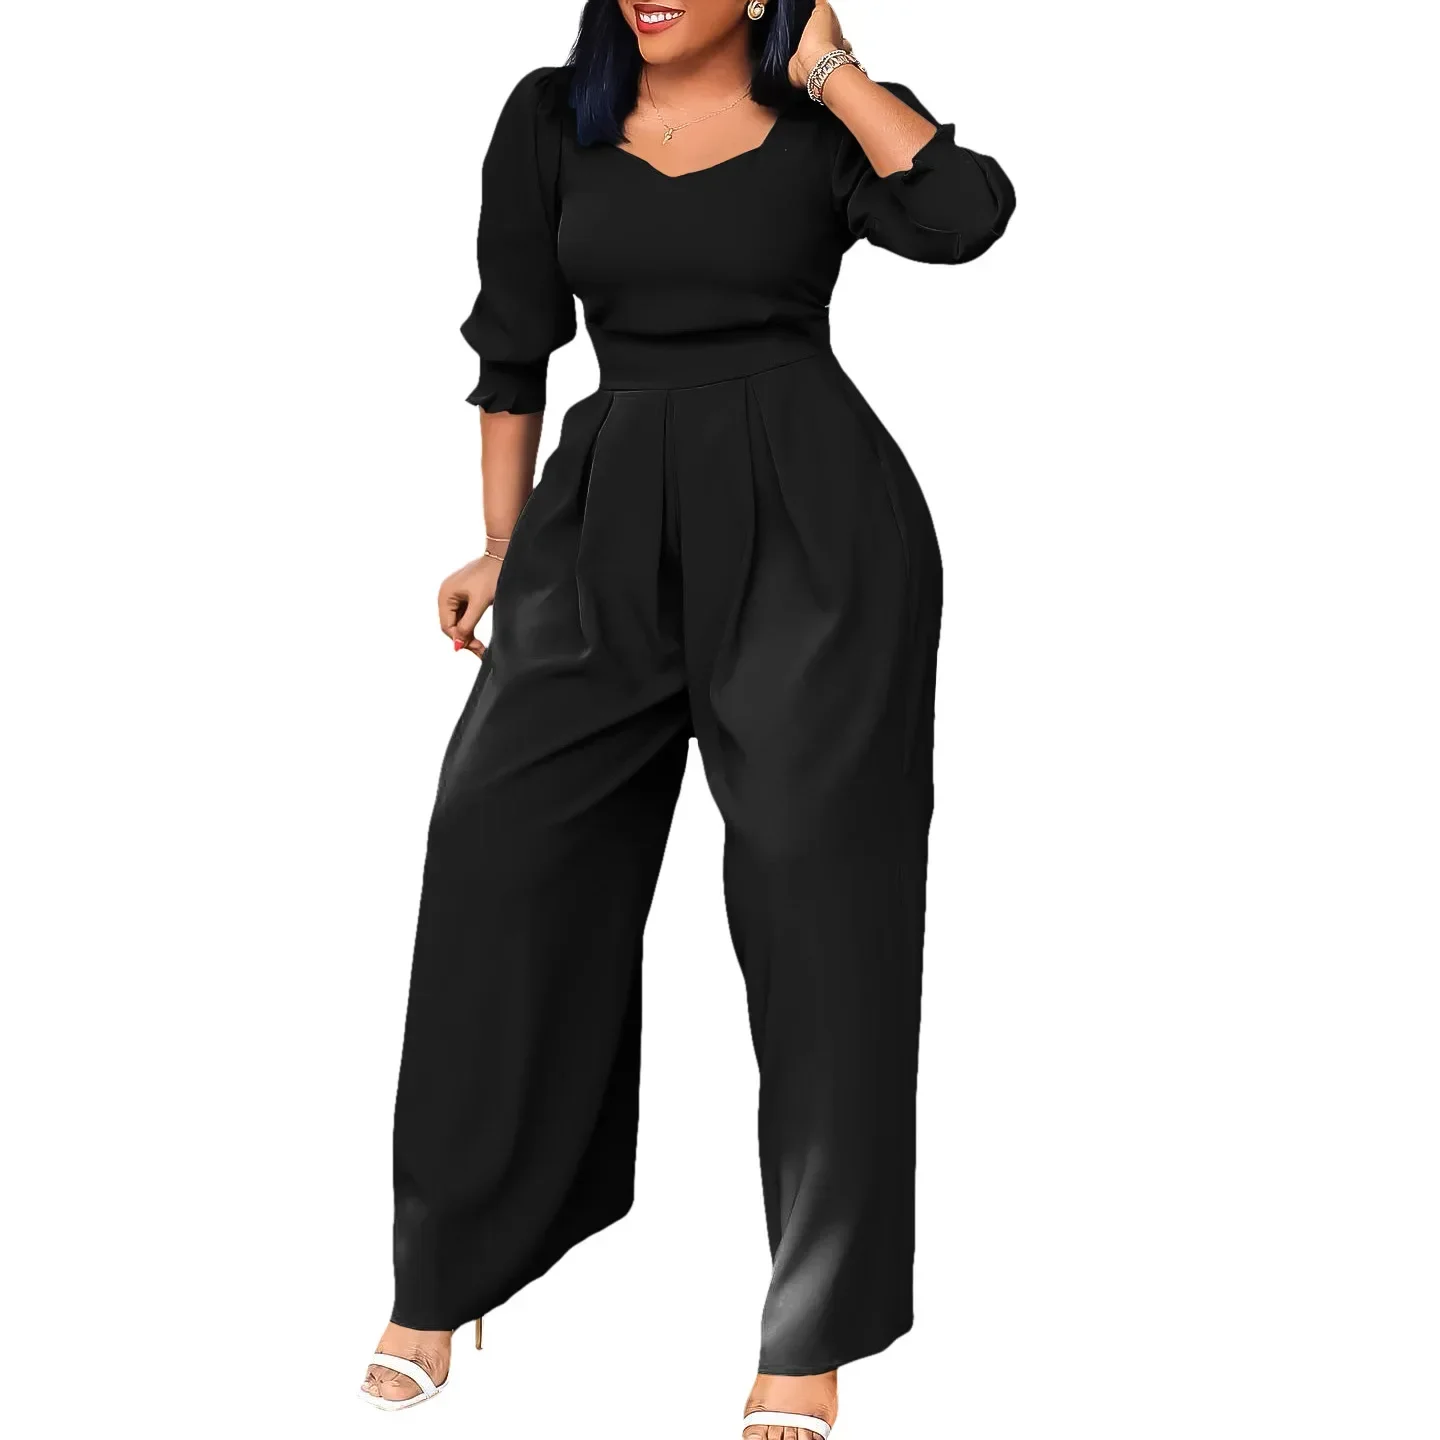 African Loose Jumpsuit Women Fashion Streetwear Jumpsuits Ladies Outfits Mamelucos Mujer Wide Leg Classy Party One Piece Romper african print clothes for women jumpsuit spring sexy romper wide leg pants african ladies jumpsuits rompers sexy party s2129001